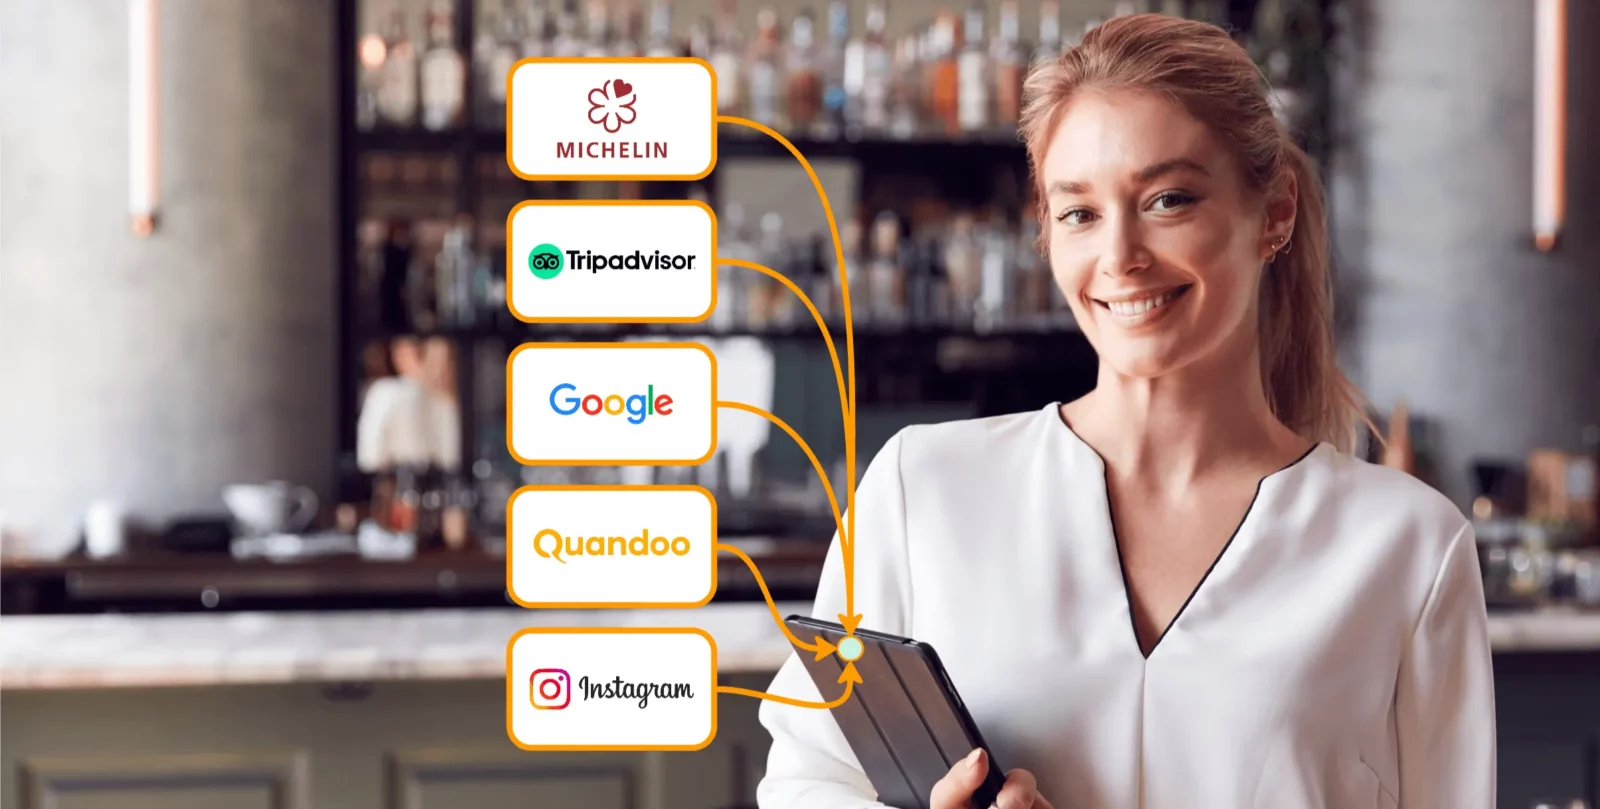 A restaurant manager is standing in her restaurant, smiling at us and holding a tablet that allows her to manage bookings from the MICHELIN Guide, Tripadvisor, Google, Quandoo, Instagram, and more.